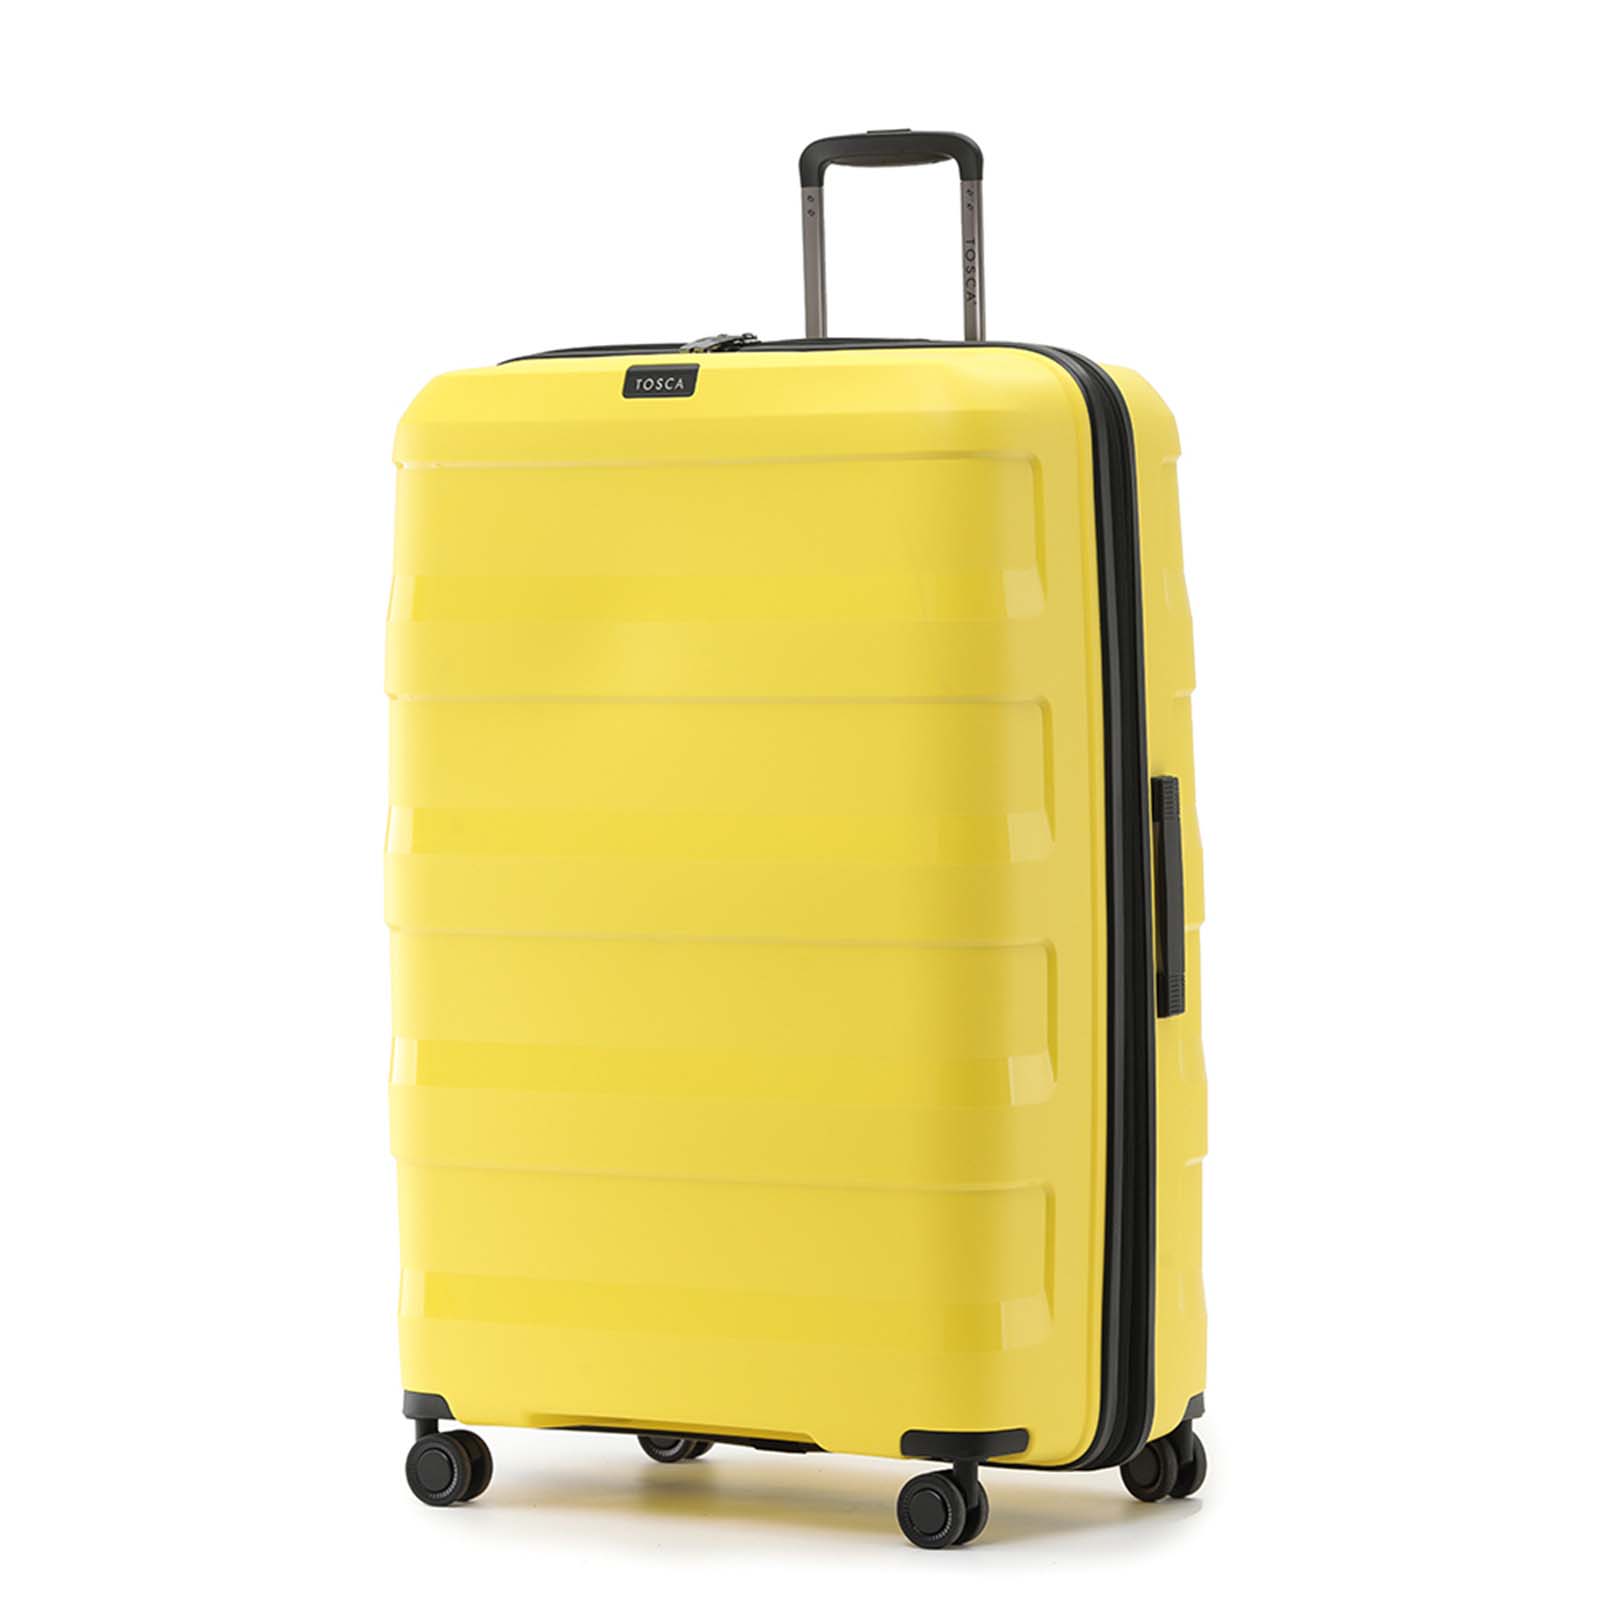 Tosca-Comet-4-Wheel-81cm-Large-Suitcase-Yellow-Front-Angle